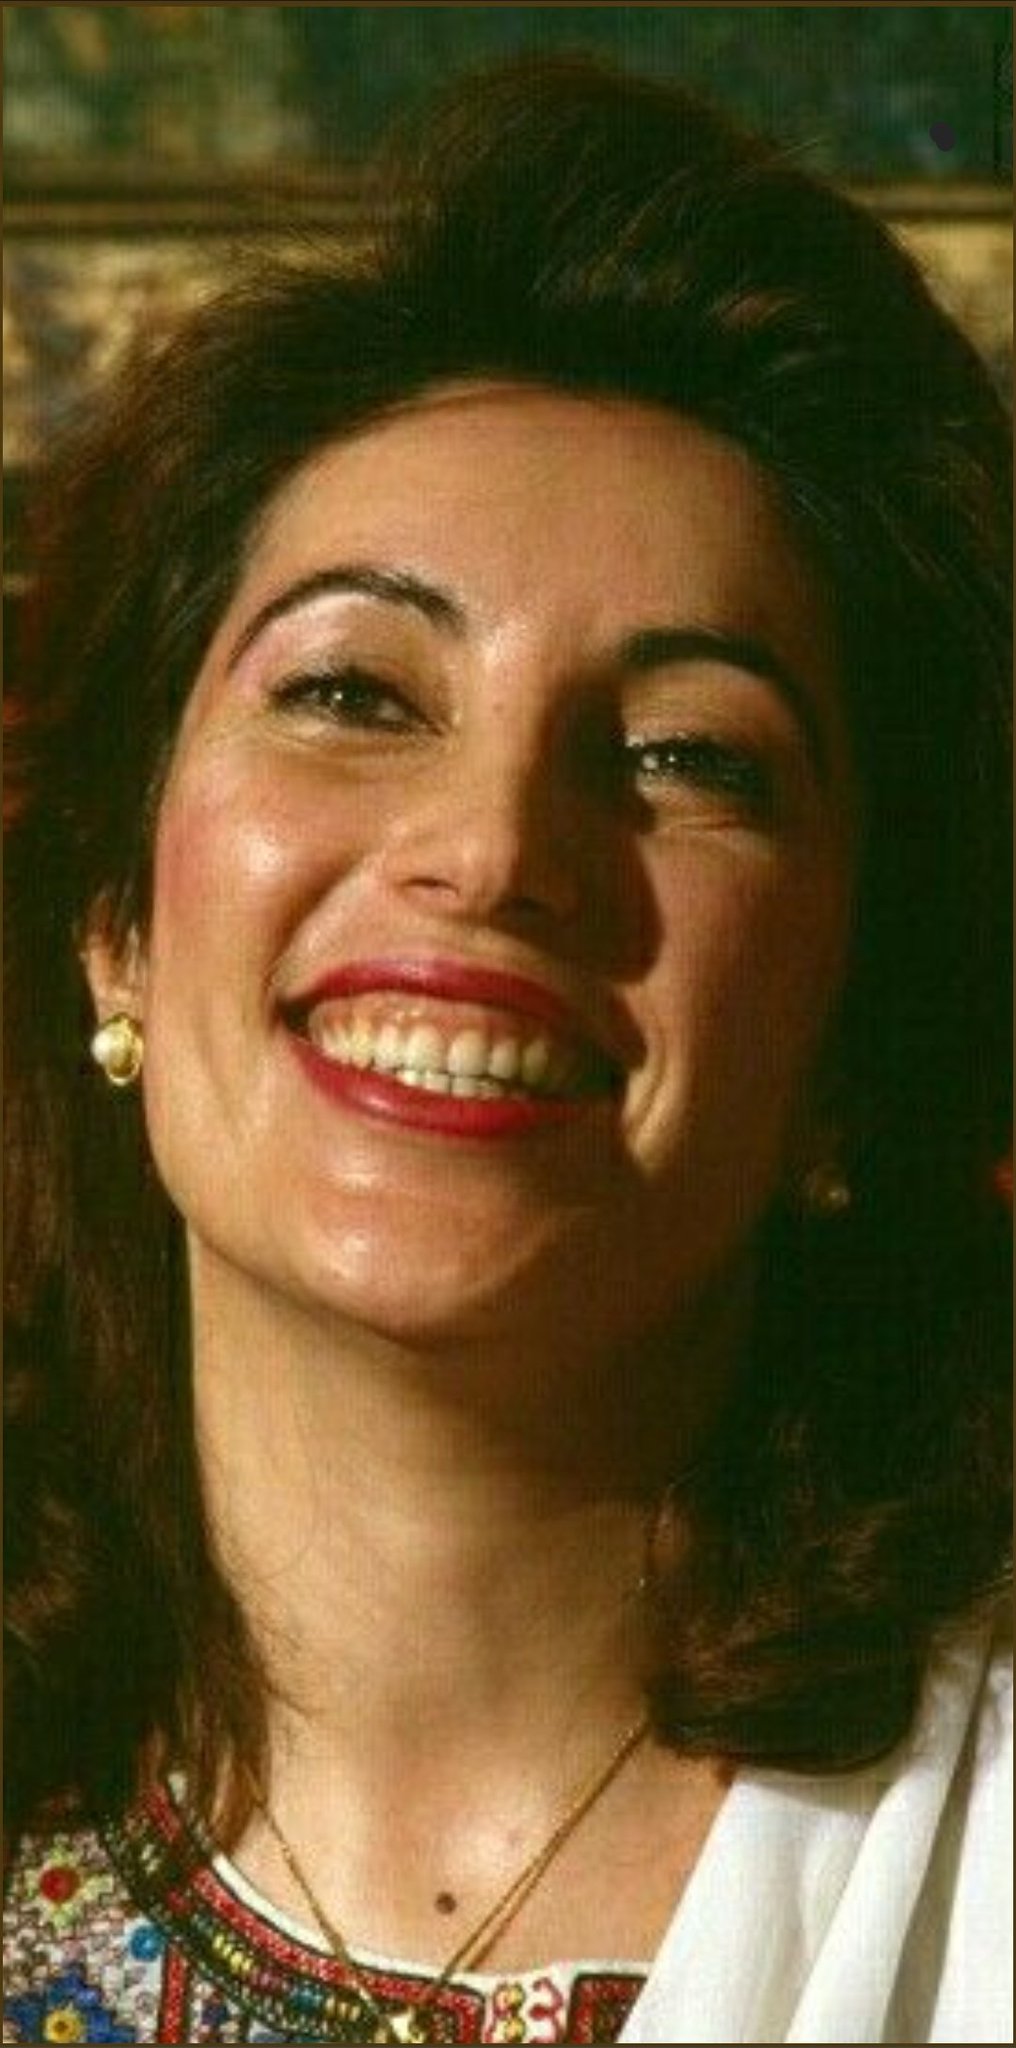 Happy Birthday Shaheed Mohtarma Brave Benazir Bhutto. We miss you        